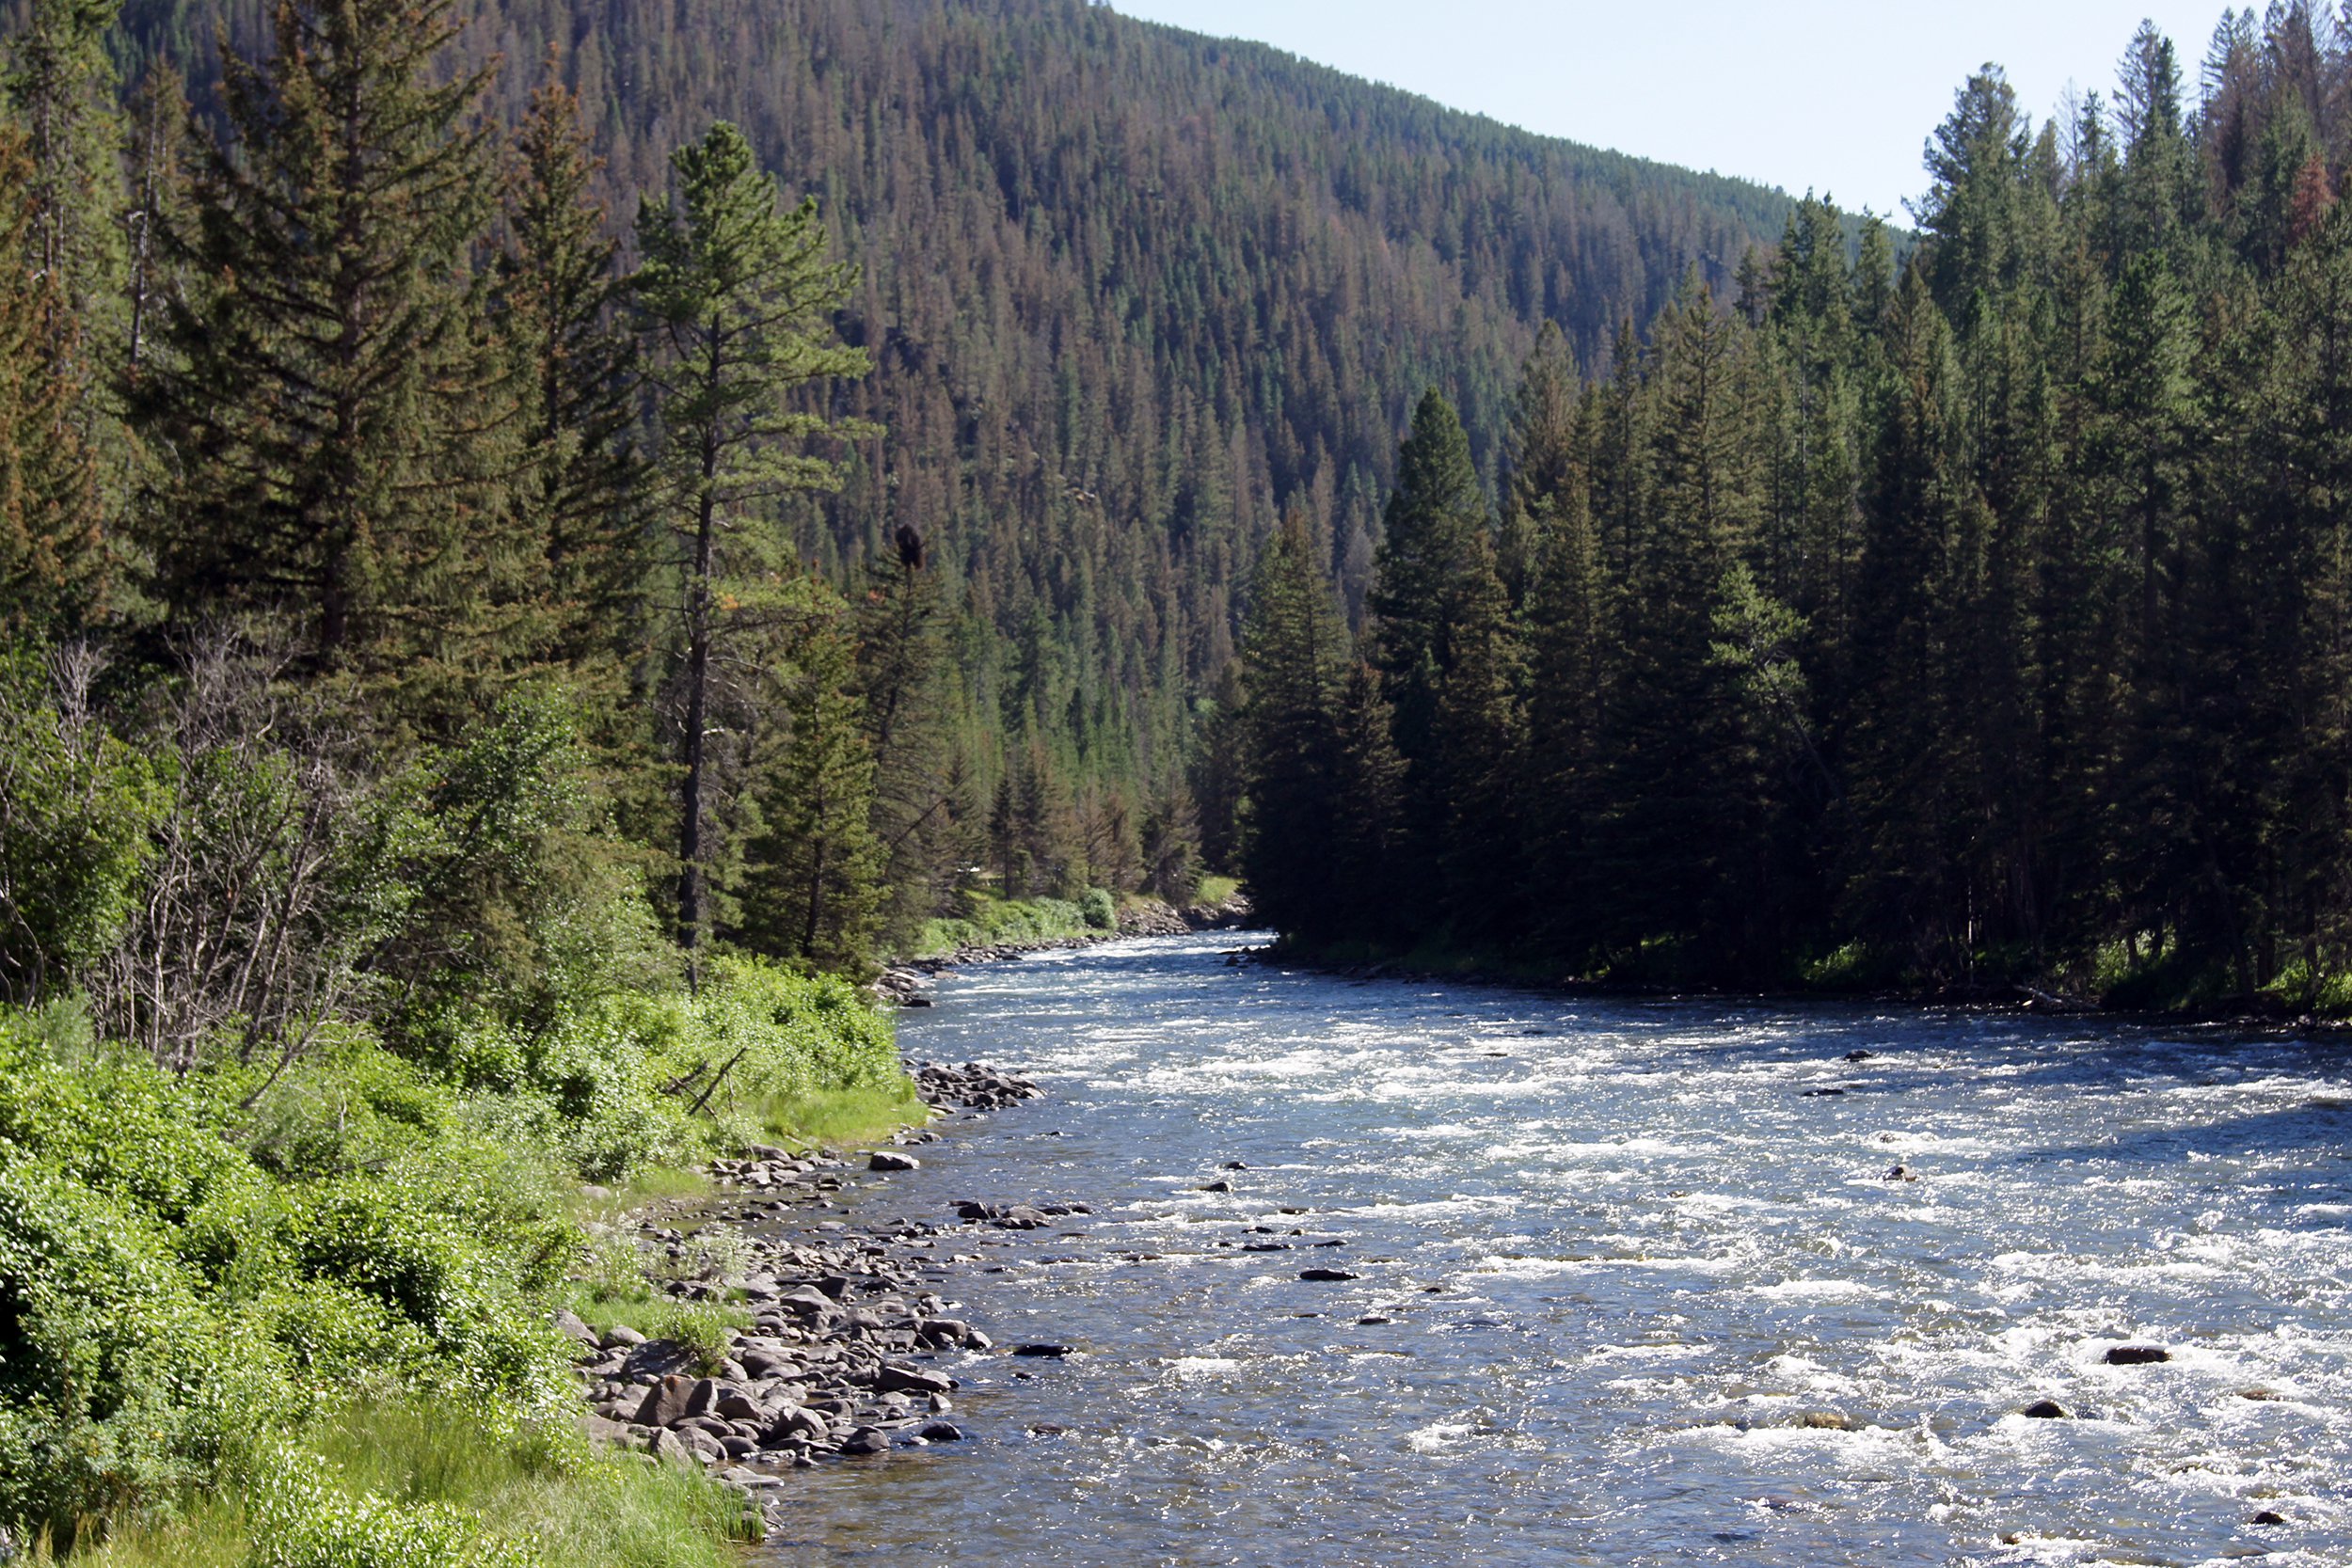 Known for world-class river fly fishing, Montana offers anglers no shortage of great spots, but the <a href="https://www.bigskyfishing.com/rivers/southern-montana/gallatin-river/">Gallatin River</a> is so spectacular in both scenery and production that it deserves a mention even in a state known for stellar fishing. Spanning the gap between Gallatin Lake in the mountains of Yellowstone to the Missouri River, the river is perfect for dry fly fishing for those on the hunt for smaller, but plentiful trout that are not picky eaters.